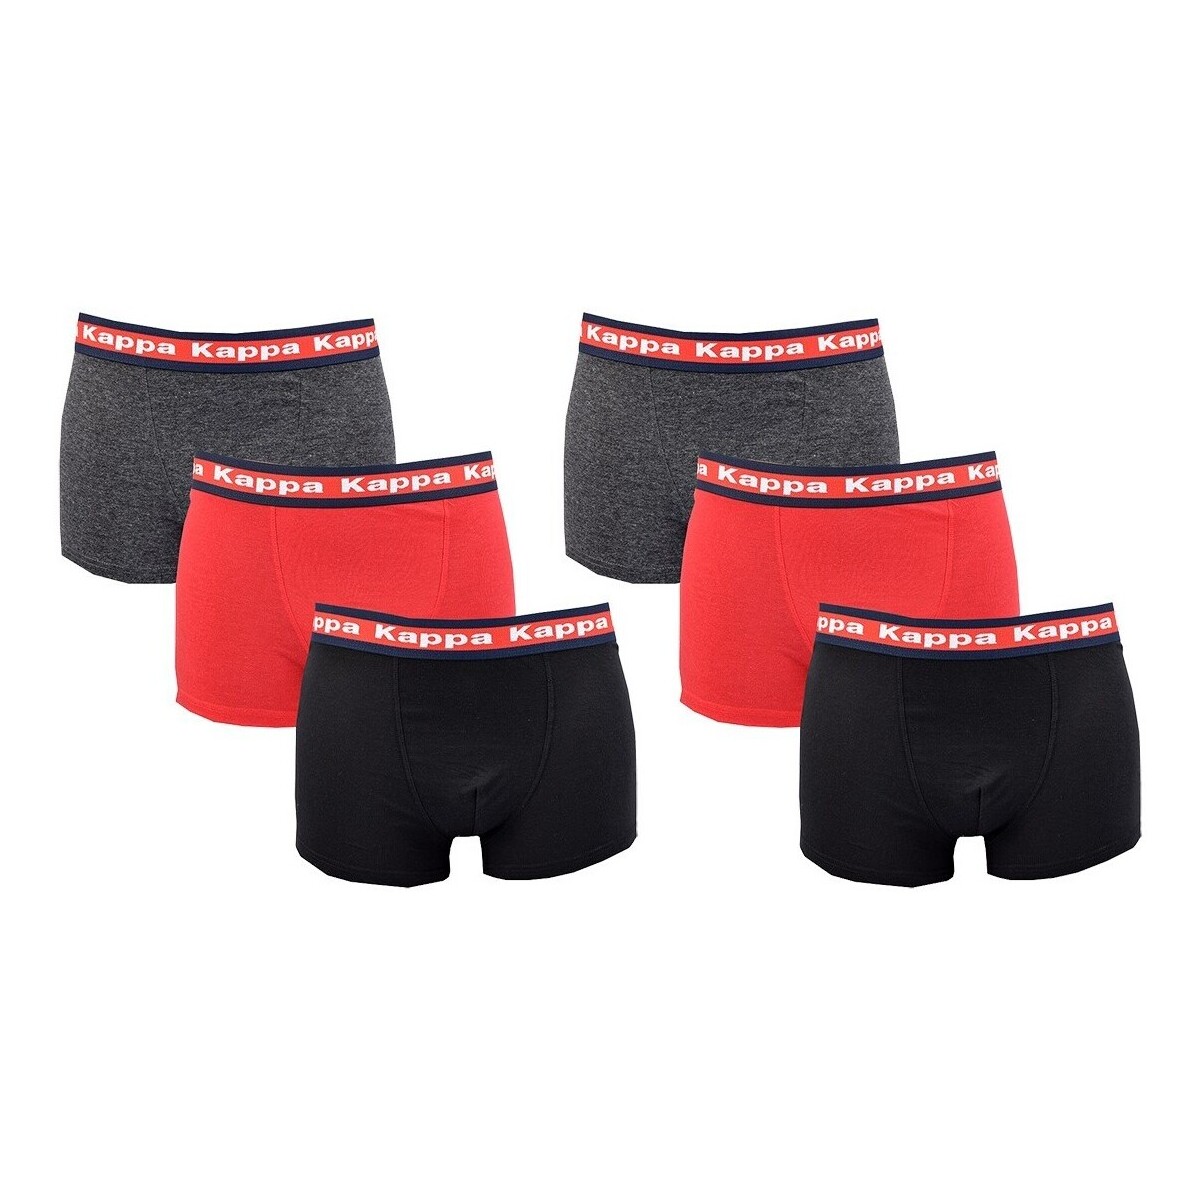 Kappa Multicolore Boxer homme 0ngLE6os